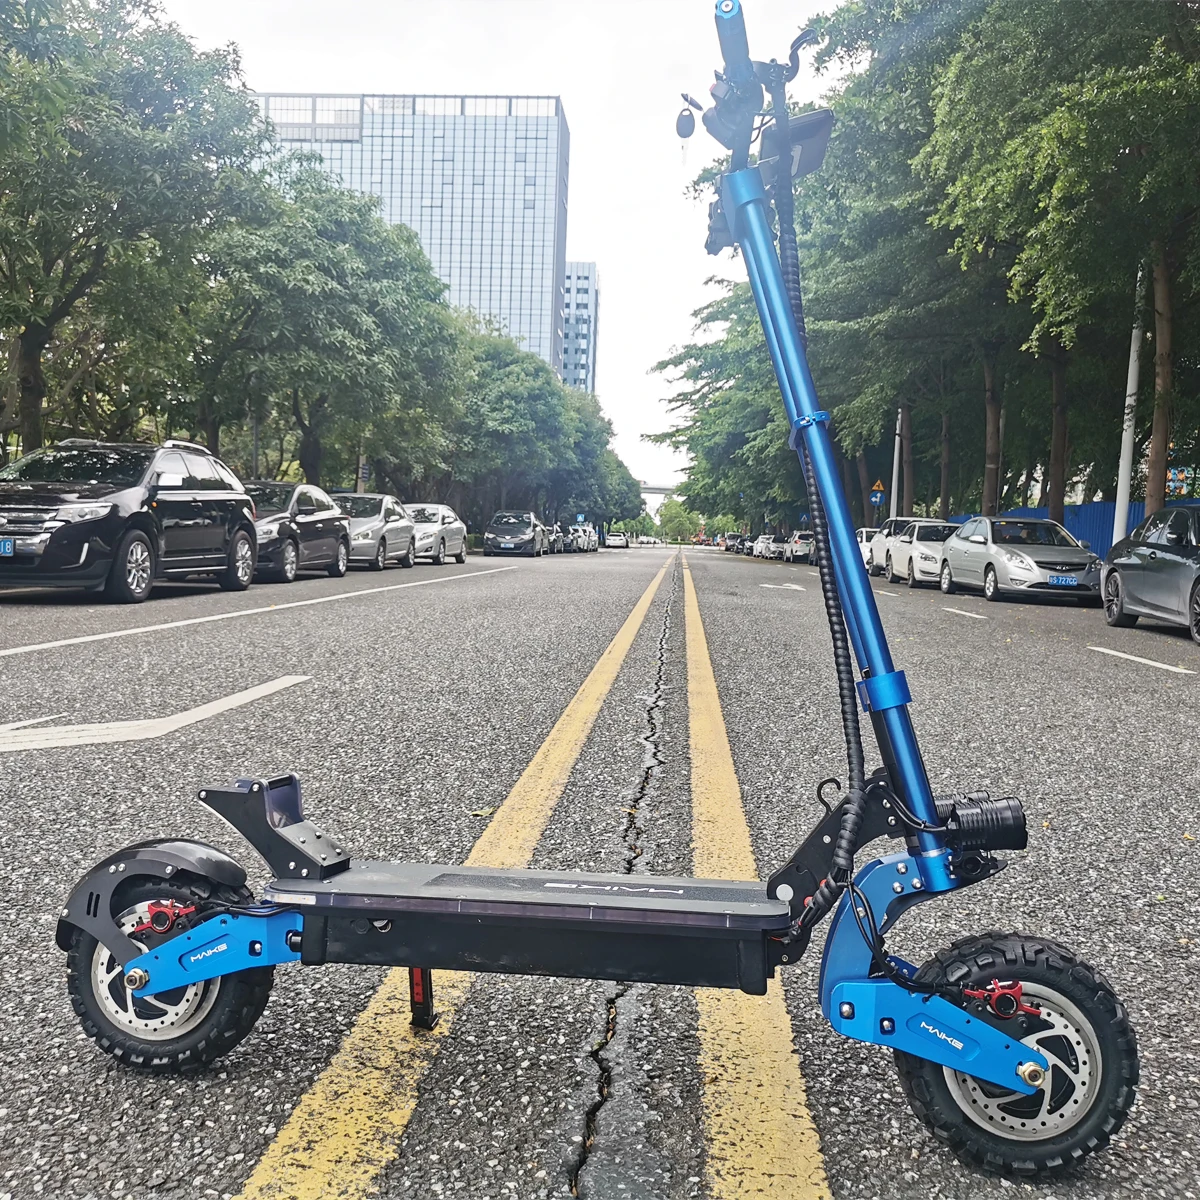 

Hot Sale Factory Direct maike kk10s pro 11 inch scooter with a seat 5600w scooter dual motor high speed scooter electric